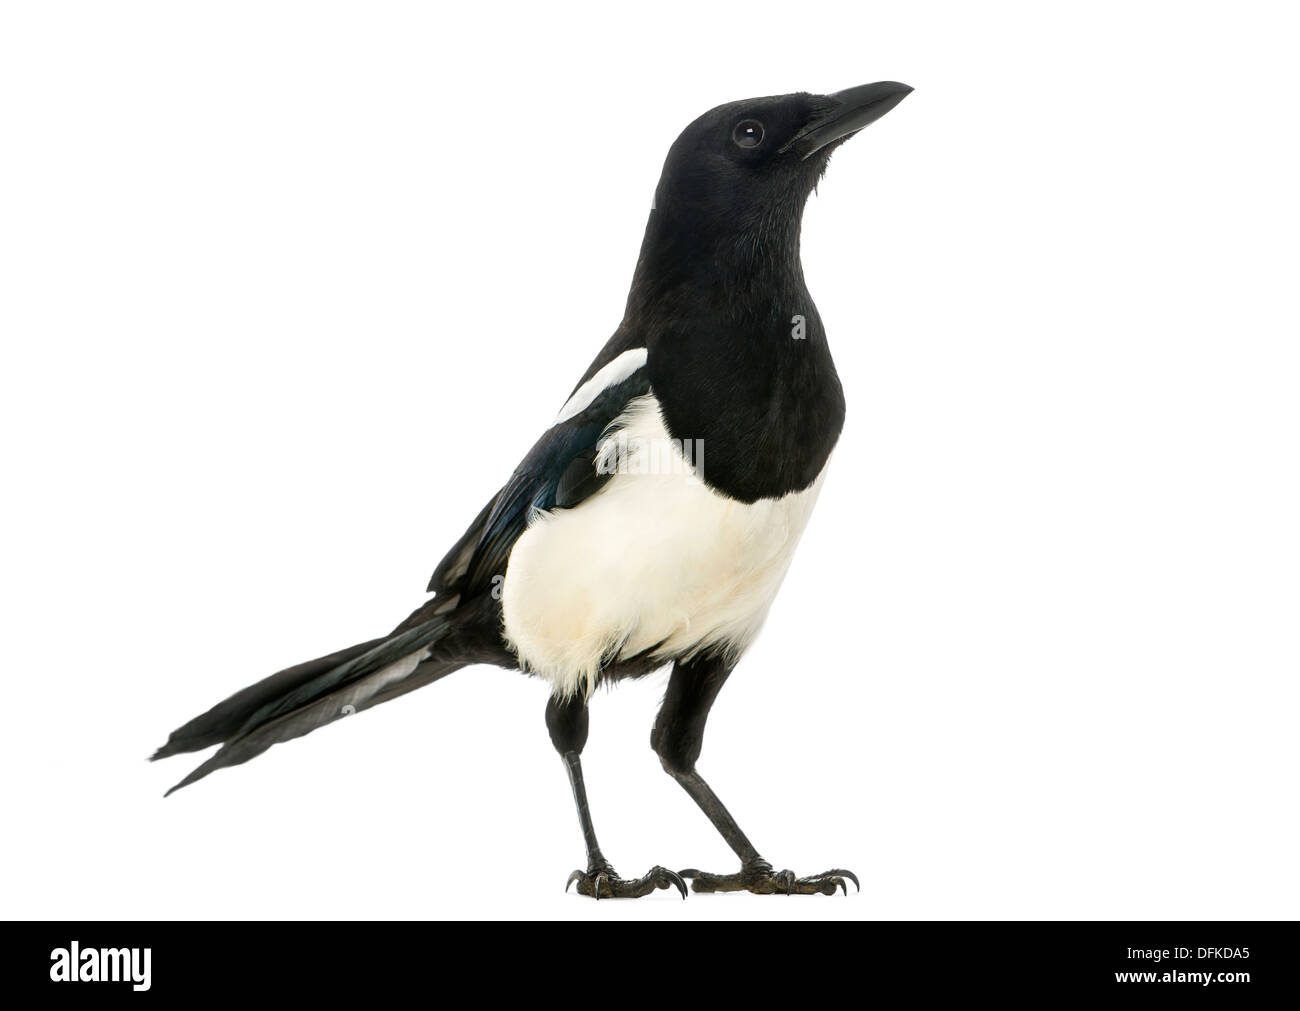 Magpie commune, Pica pica, against white background Banque D'Images